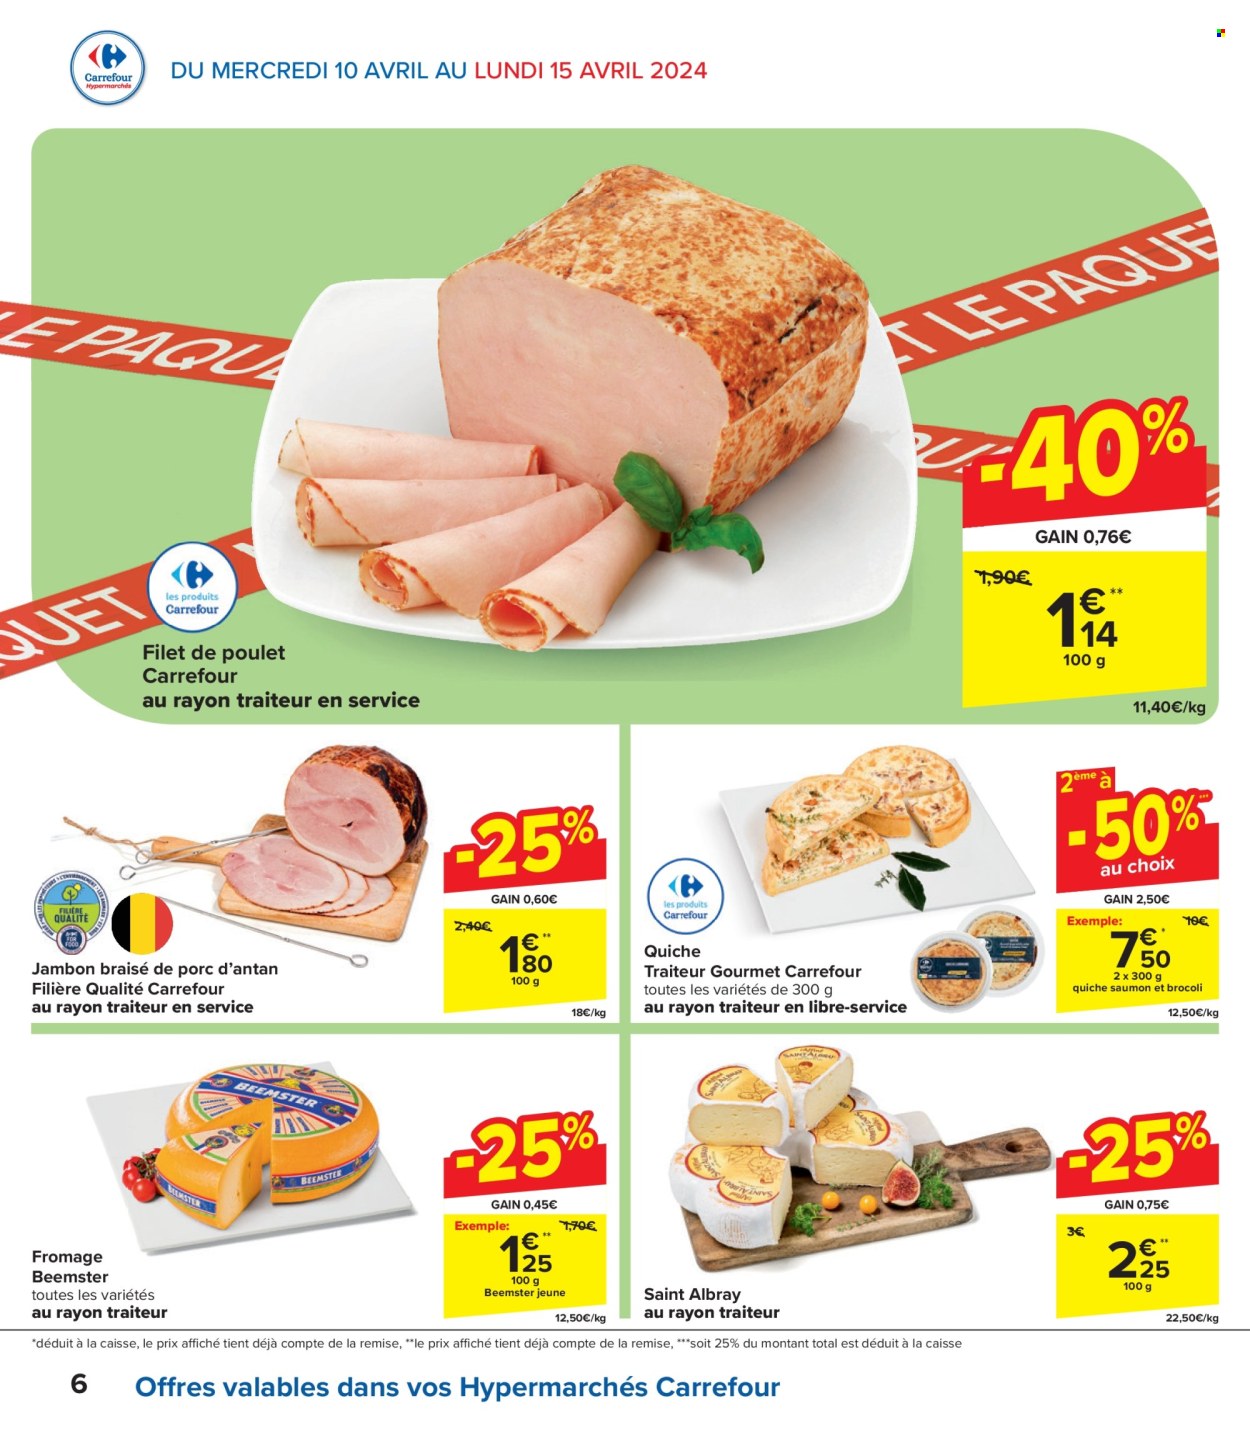 Catalogue Carrefour hypermarkt - 10.4.2024 - 22.4.2024. Page 6.